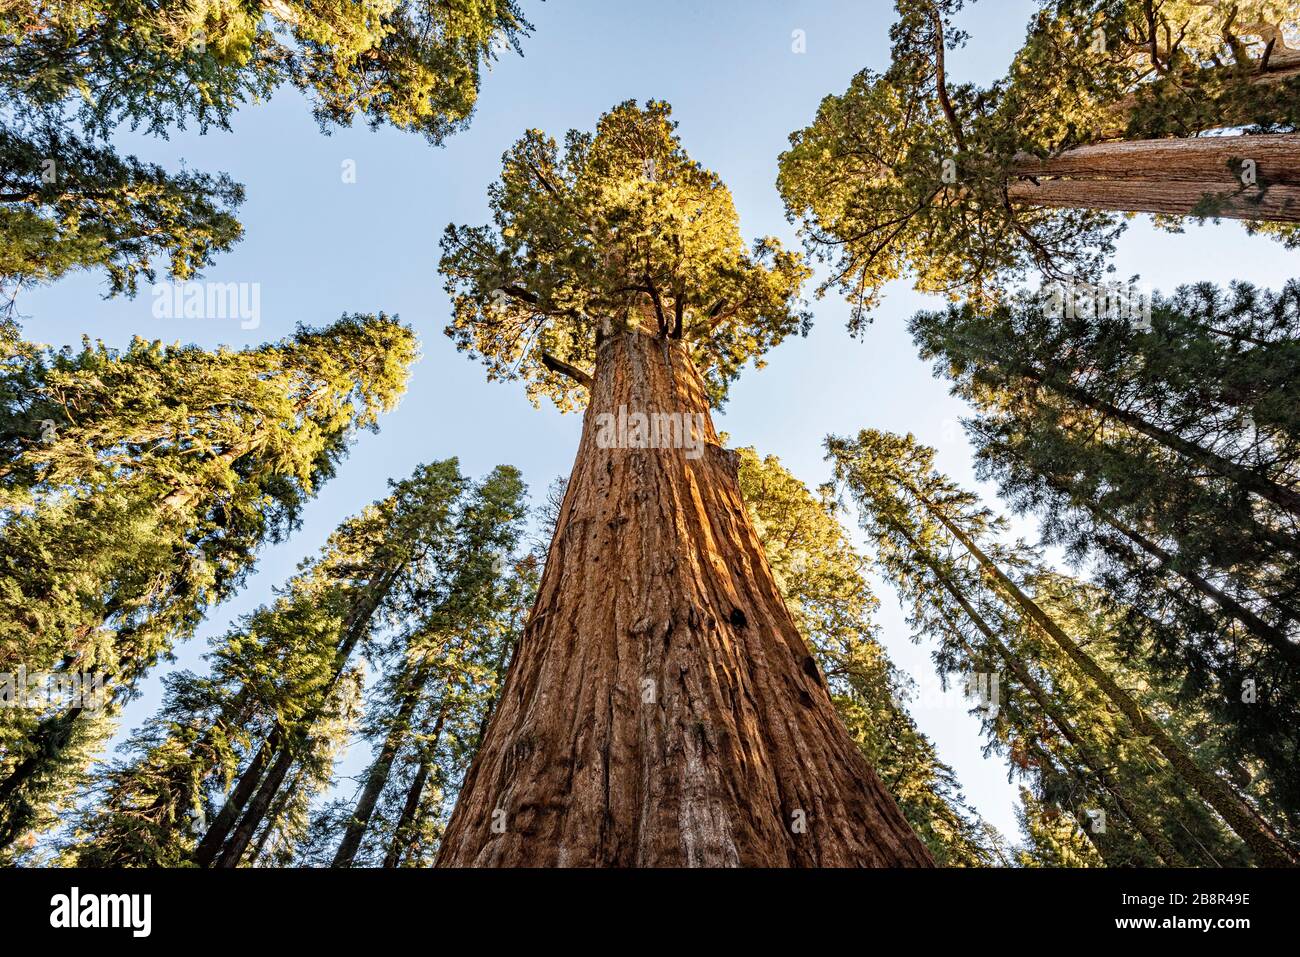 The grand sequoias tower over visitors to Sequoia National Park. Stock Photo